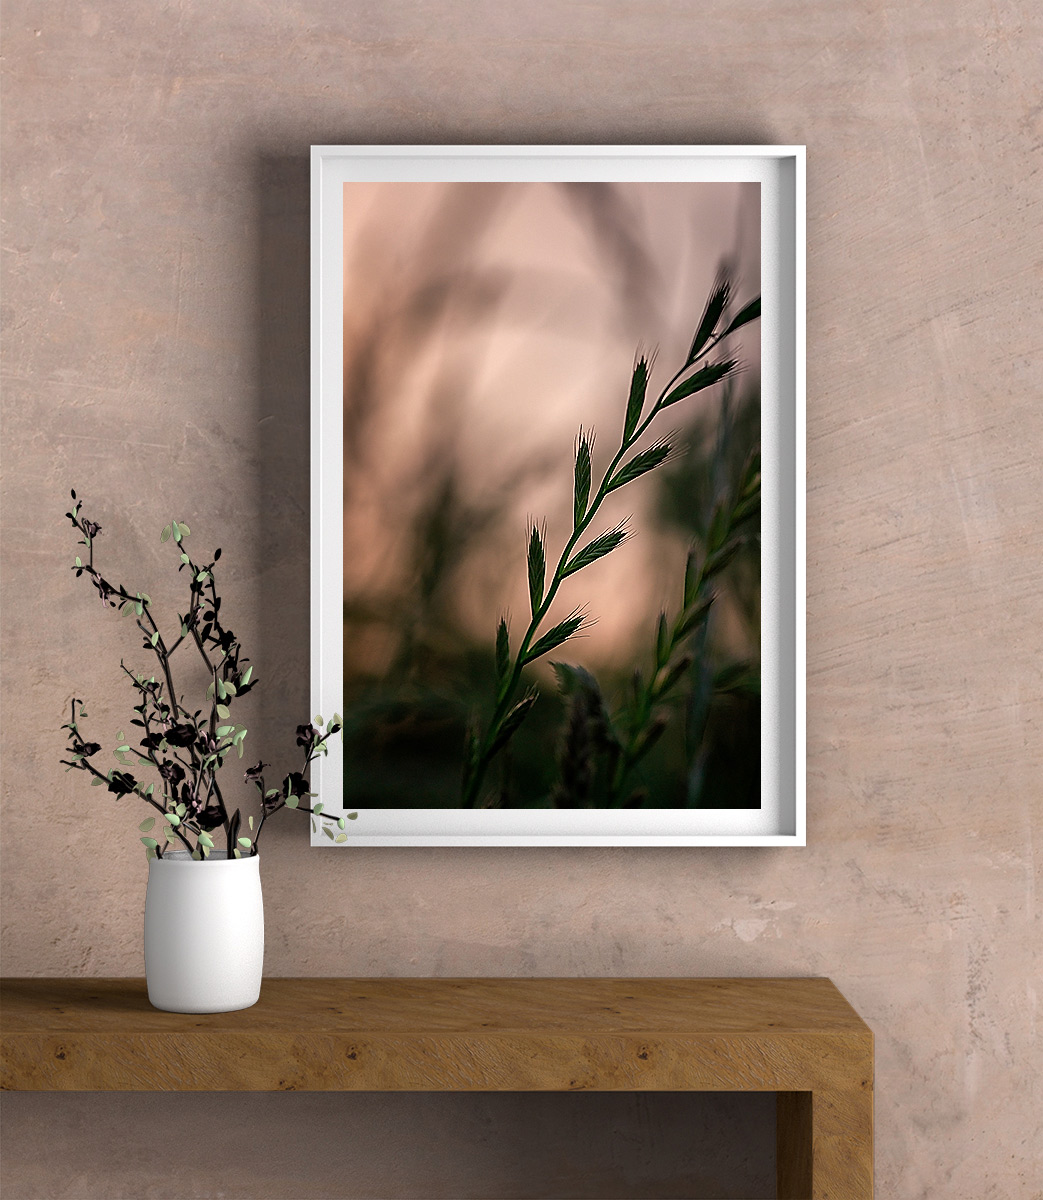 Close-up macro photograph of meadow grass in evening light, framed in a white frame with white mounting, hanging on a wall. A wooden sideboard and a leafy plant in a white pot are visible underneath.